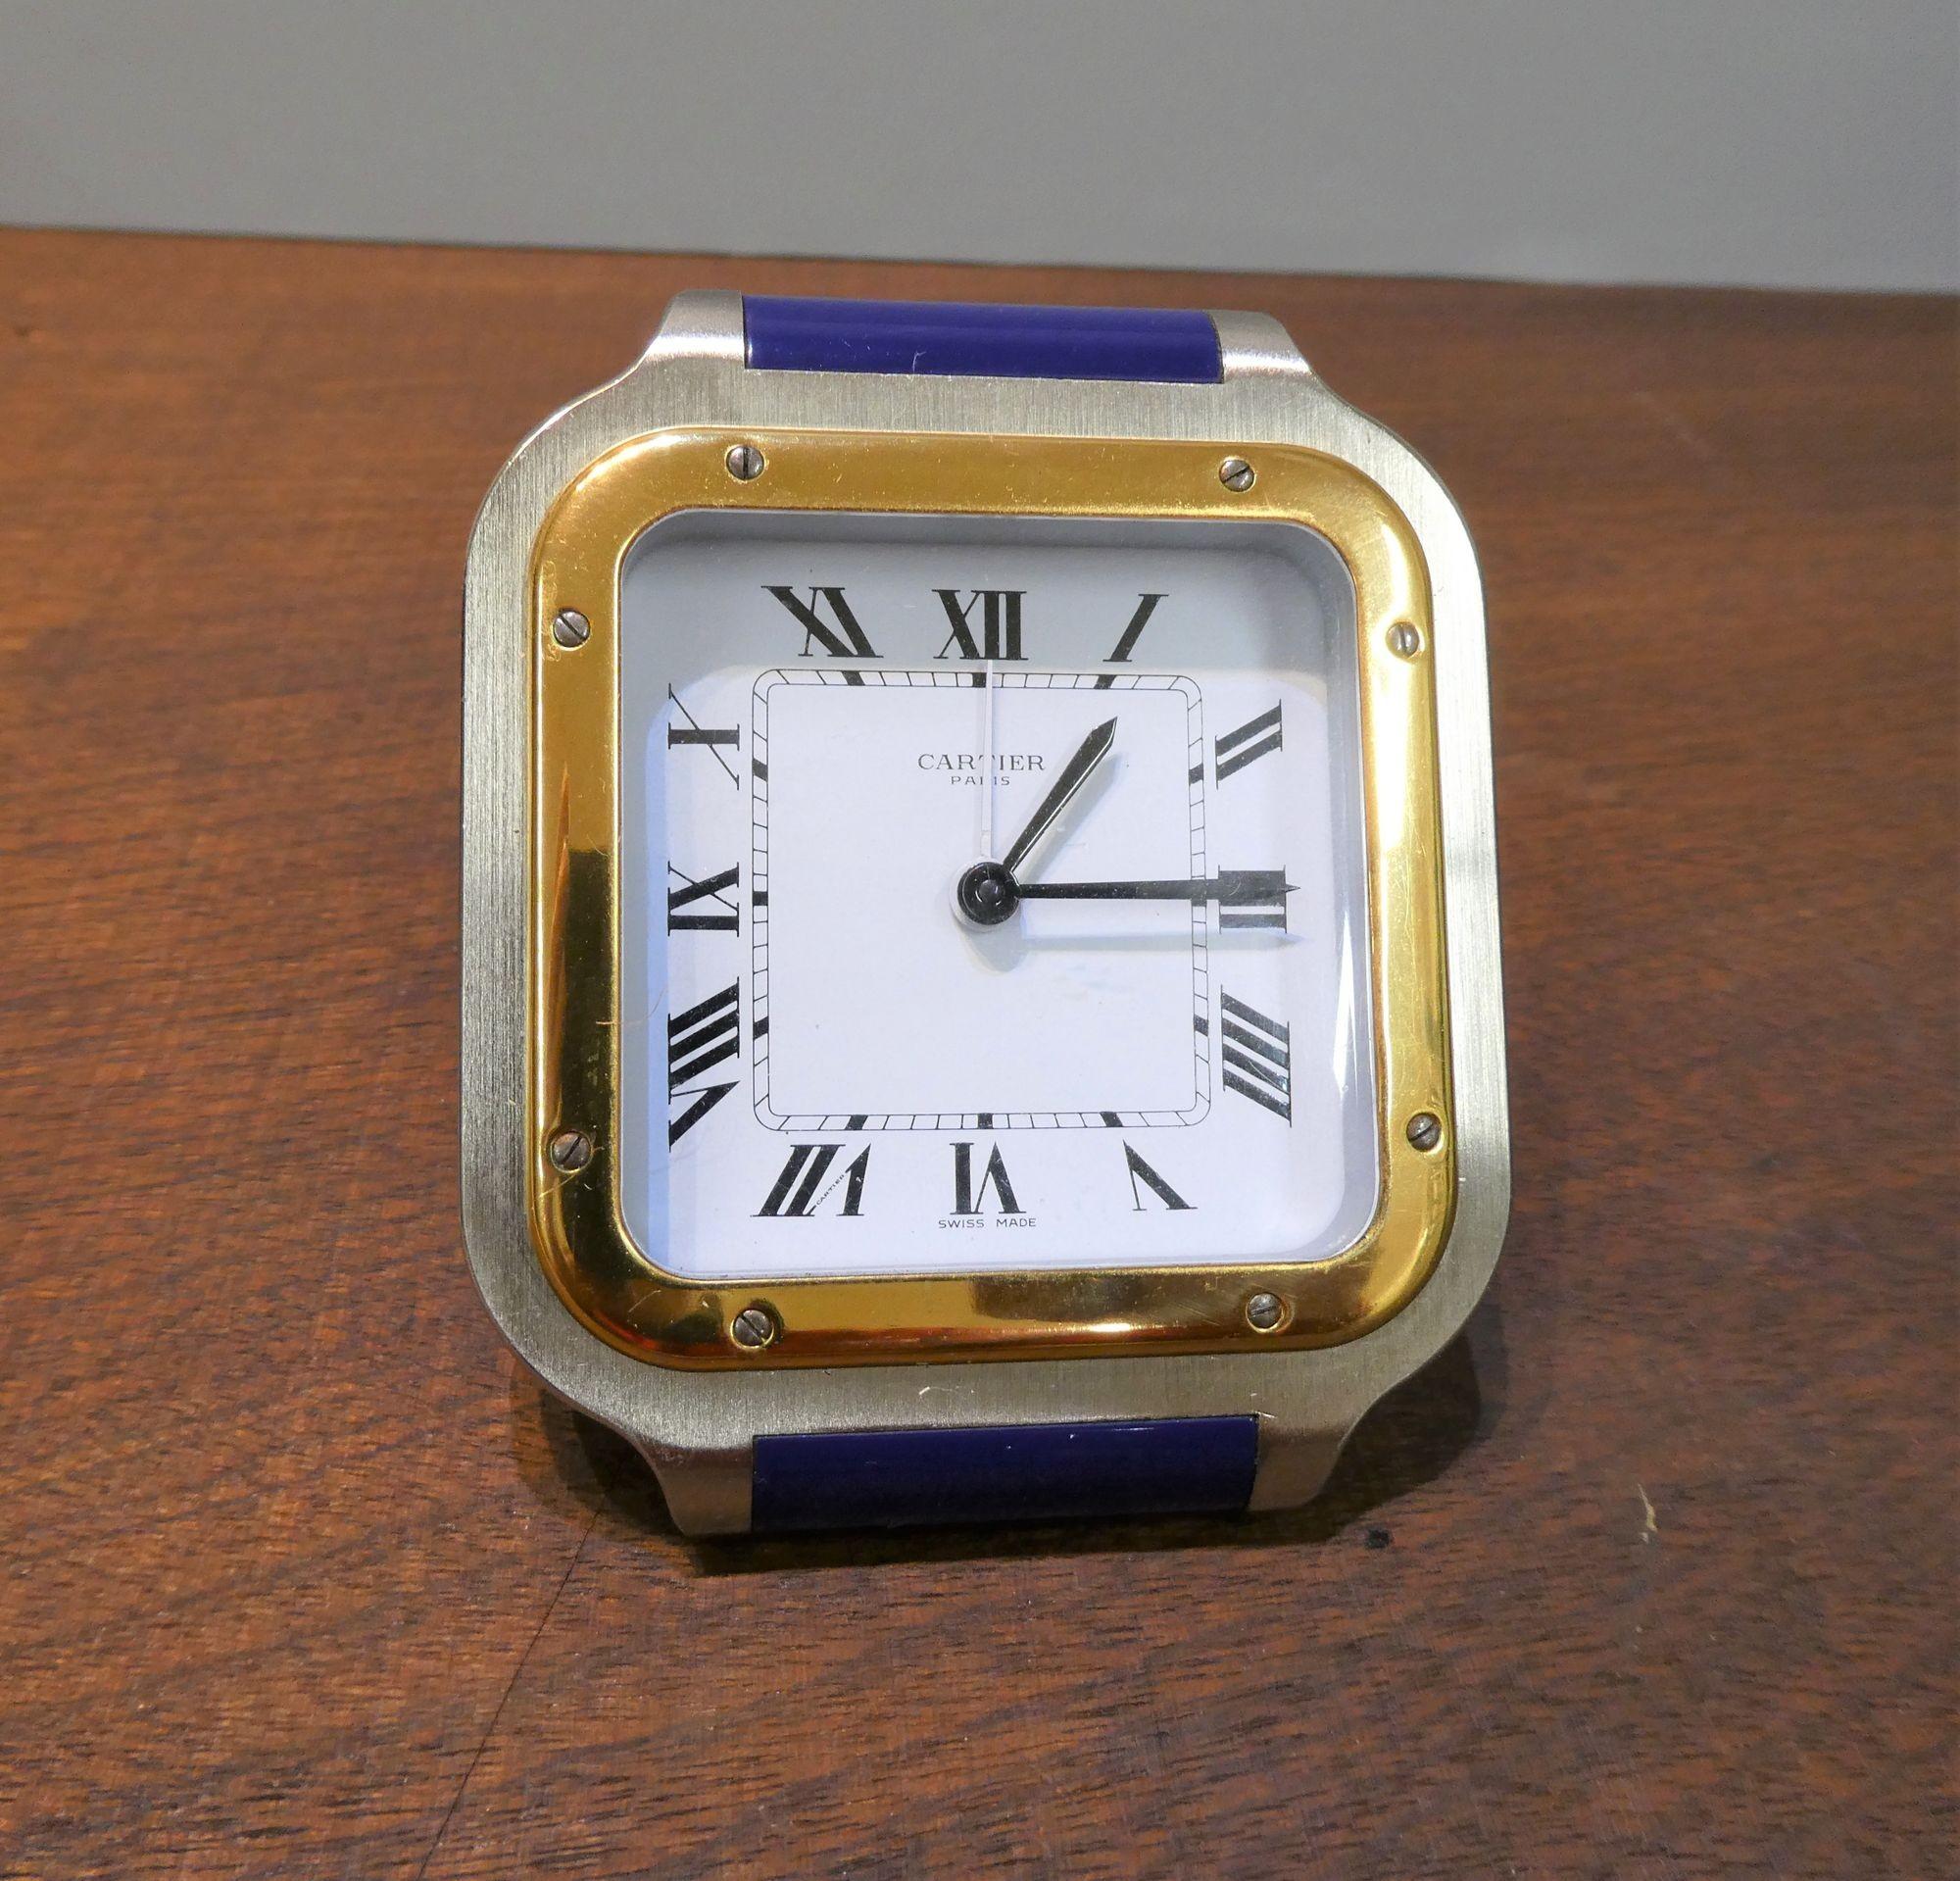 Cartier Travel Clock
Rectangular strut frame in a brushed steel frame with Lapis Lazuli inserts, brass bezel outlining a painted dial with Roman numerals, original hands and alarm hand signed ‘Cartier’, Paris.
Gilded strut frame supported by two